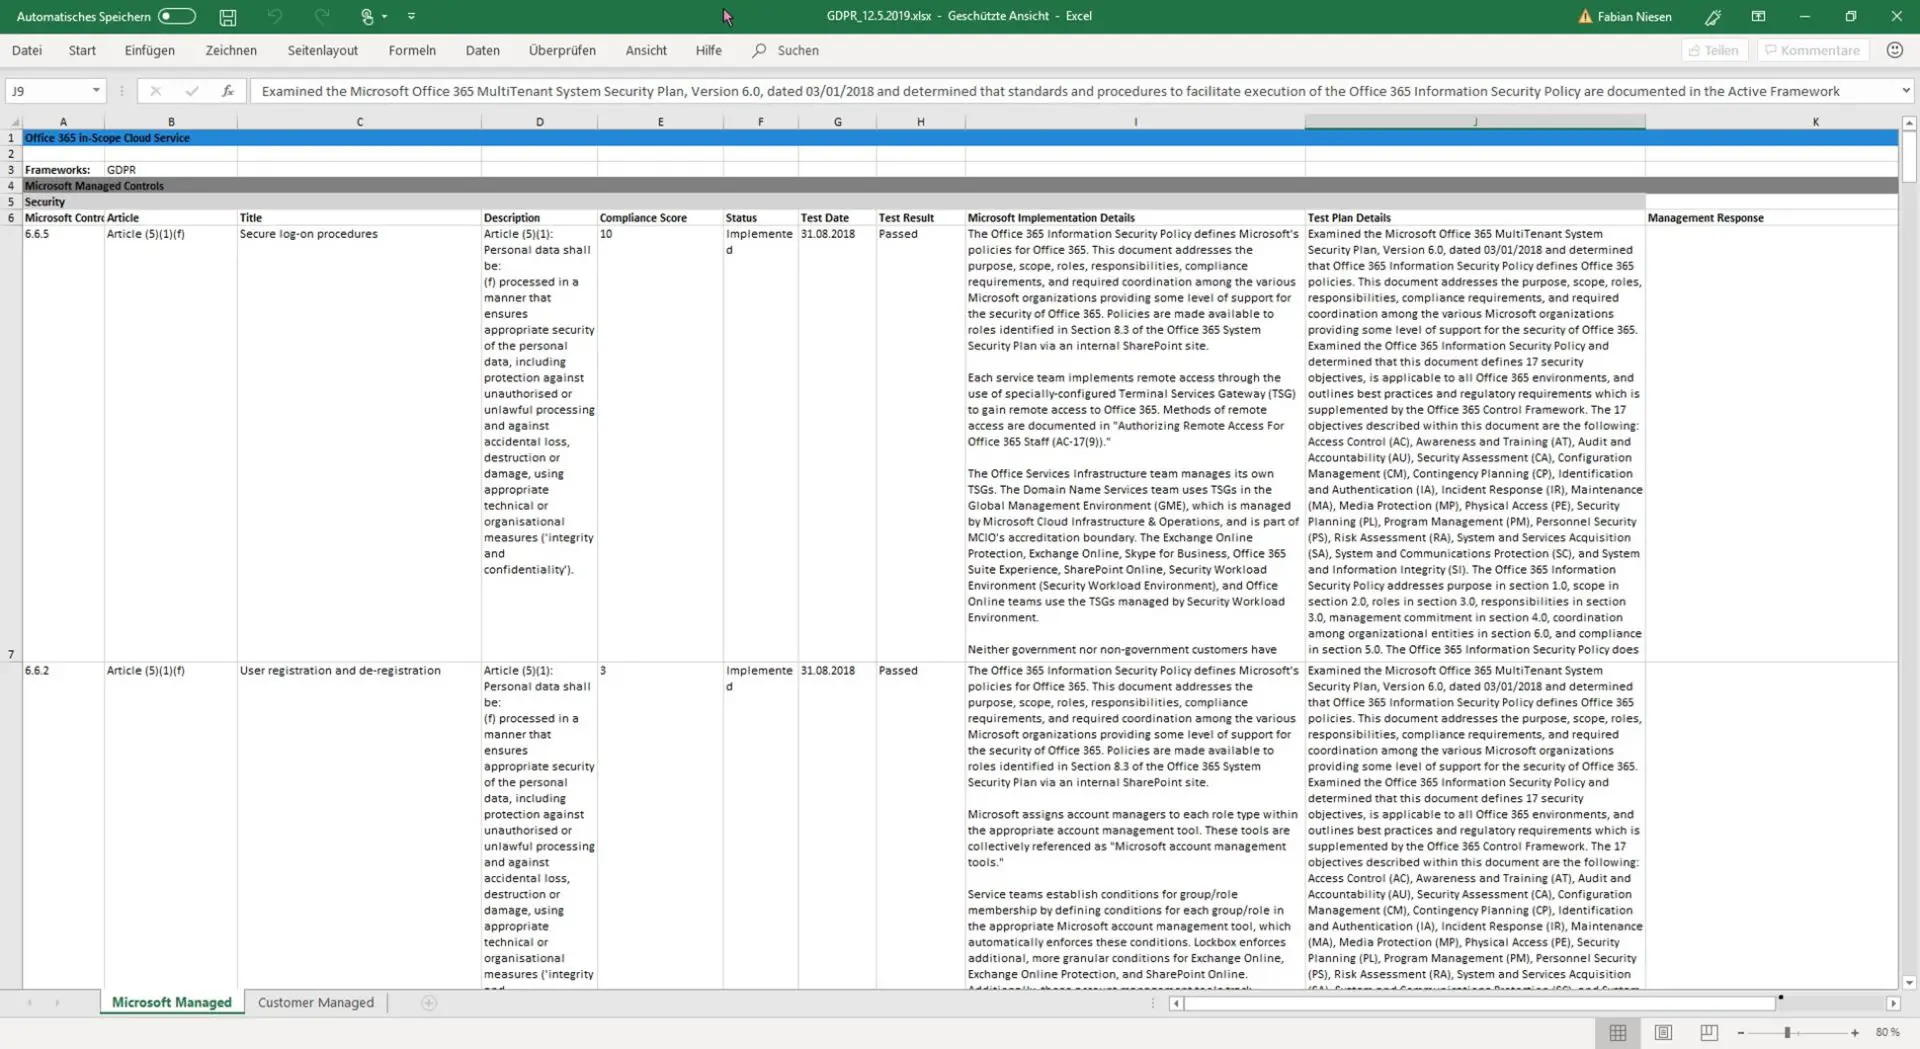 Excel export from the Compliance Manager. Source: Screenshot